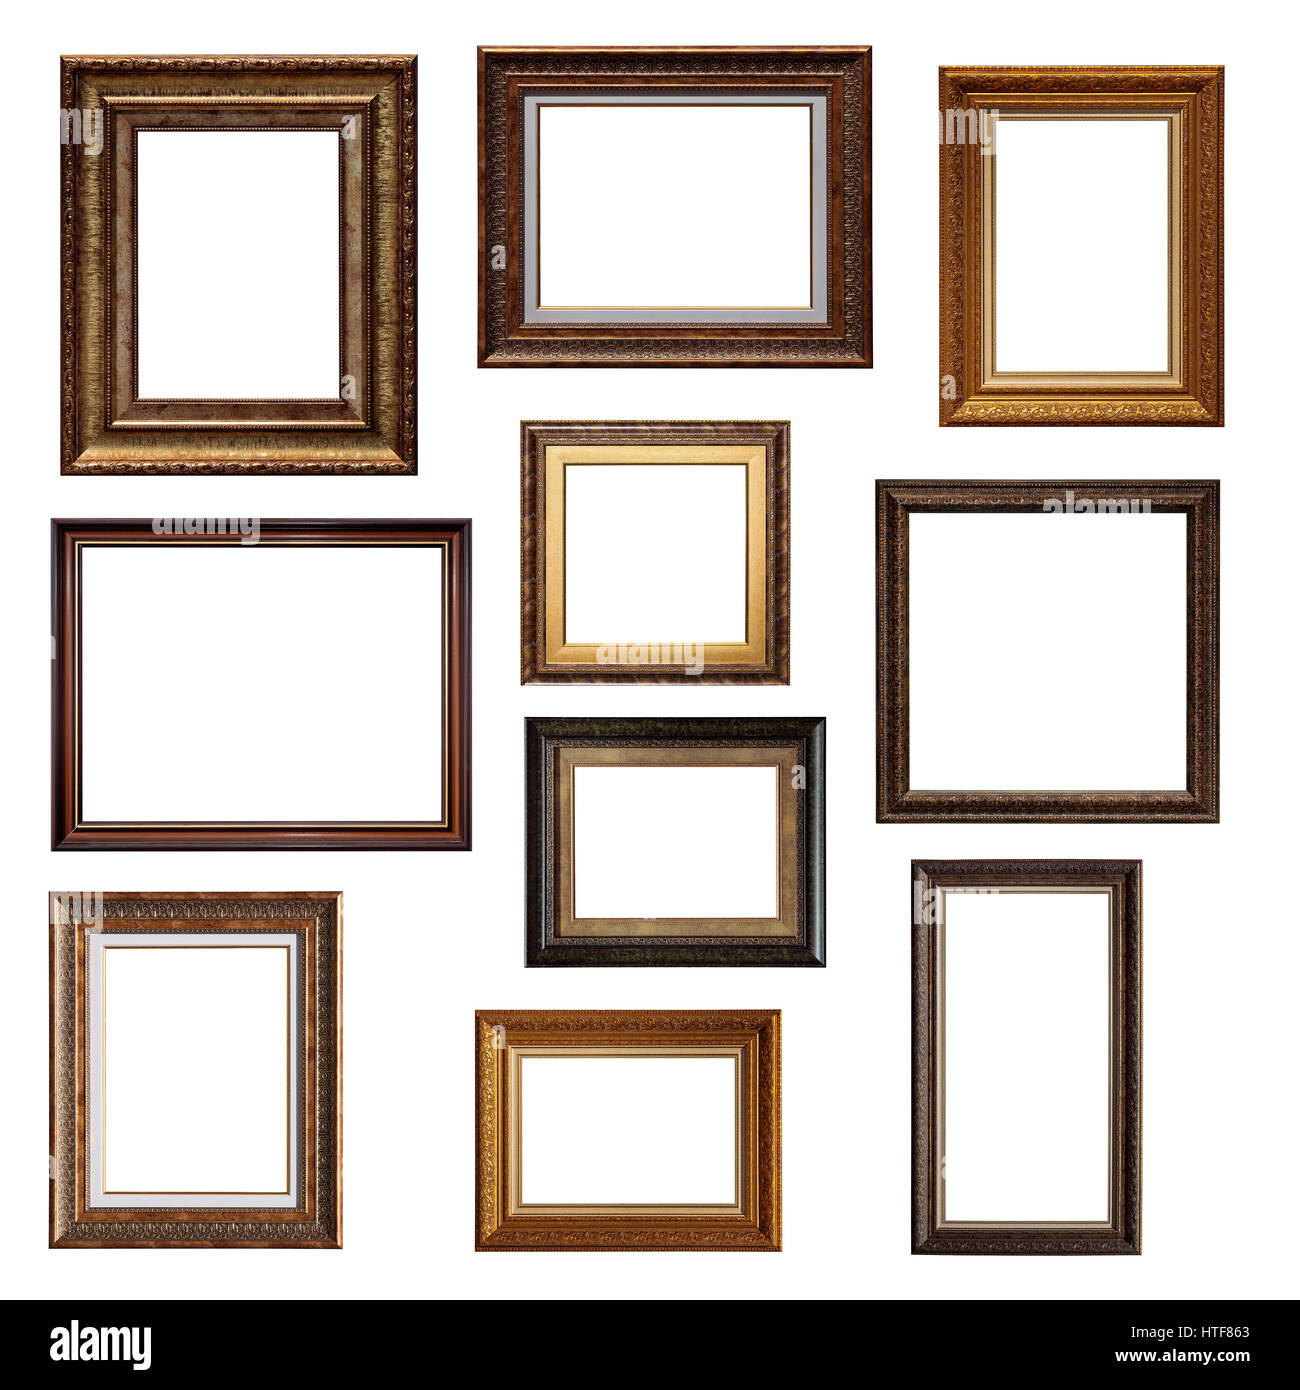 Set of picture frames. Collage of different canvas painting frames isolated on white background Stock Photo